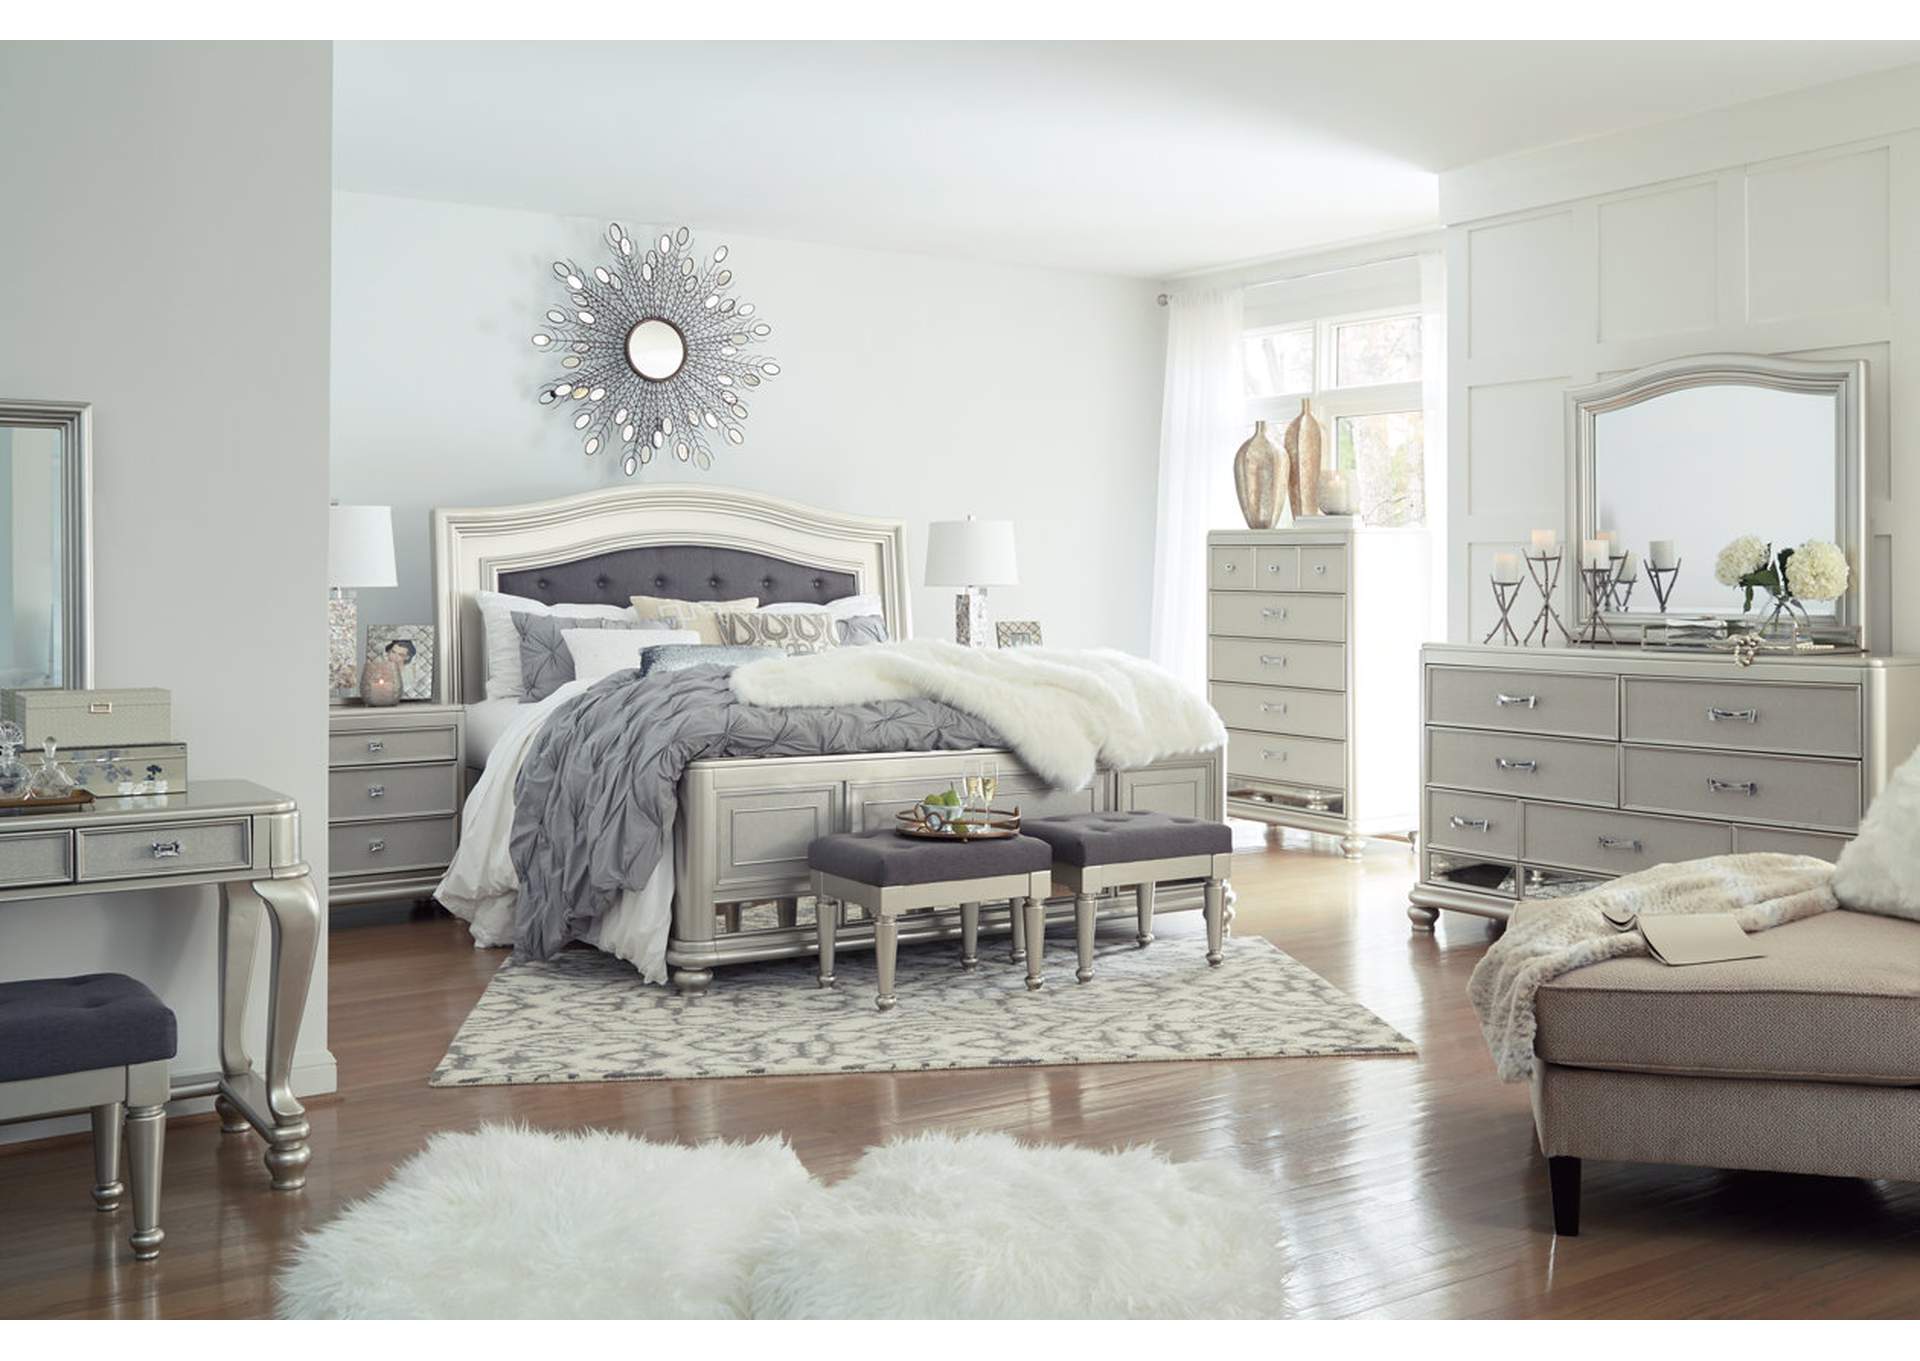 Coralayne King Panel Bed,Signature Design By Ashley